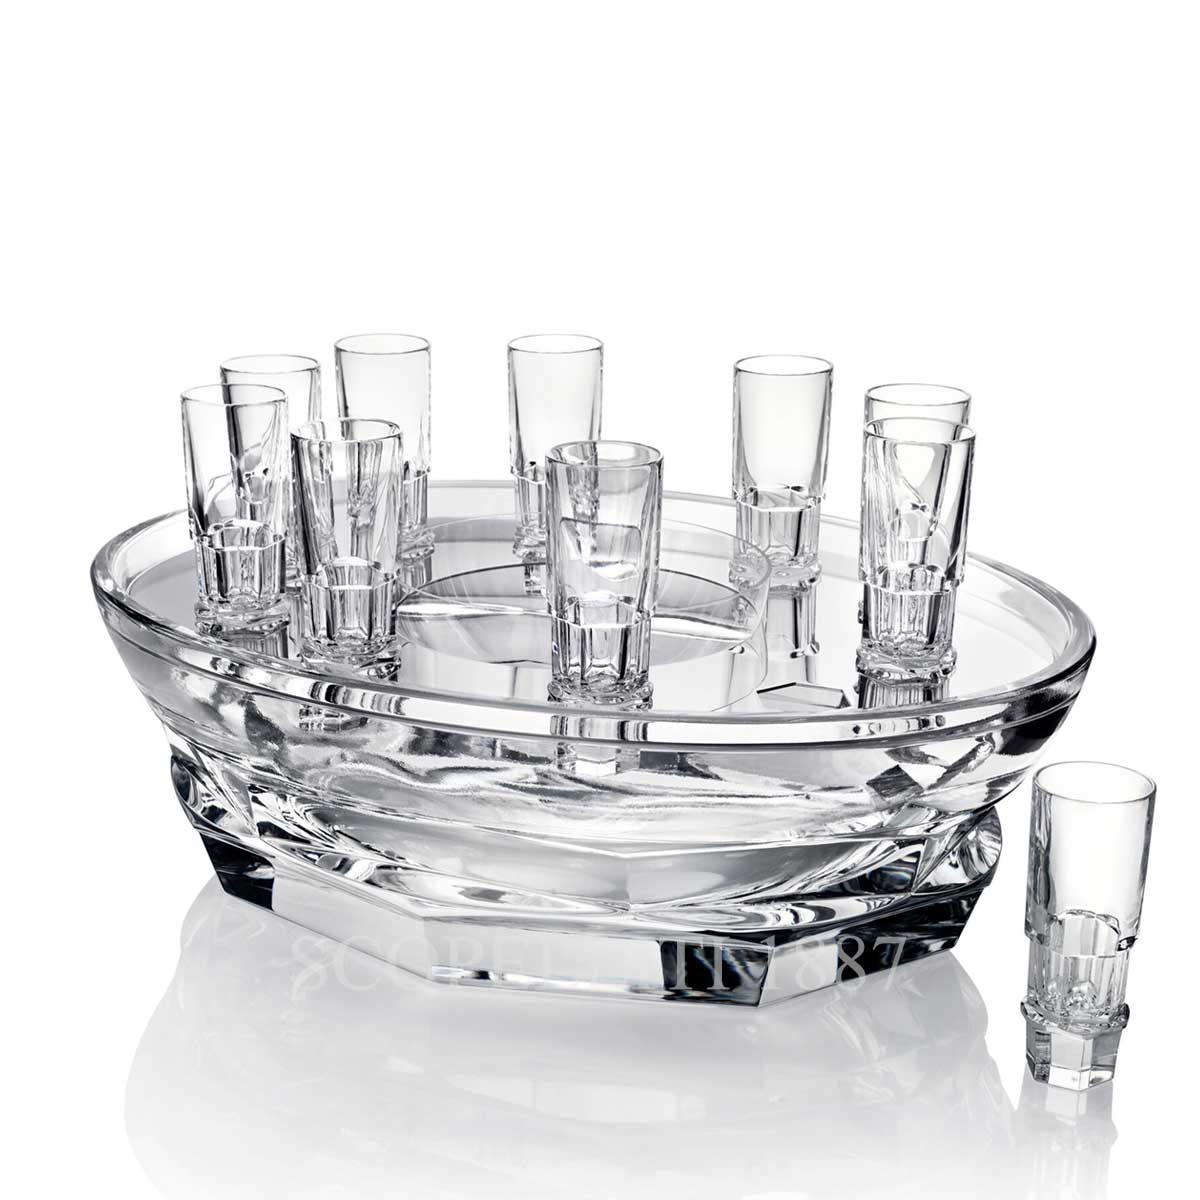 Baccarat Harcourt Abysse Caviar Set - Baccarat Crystal Gift